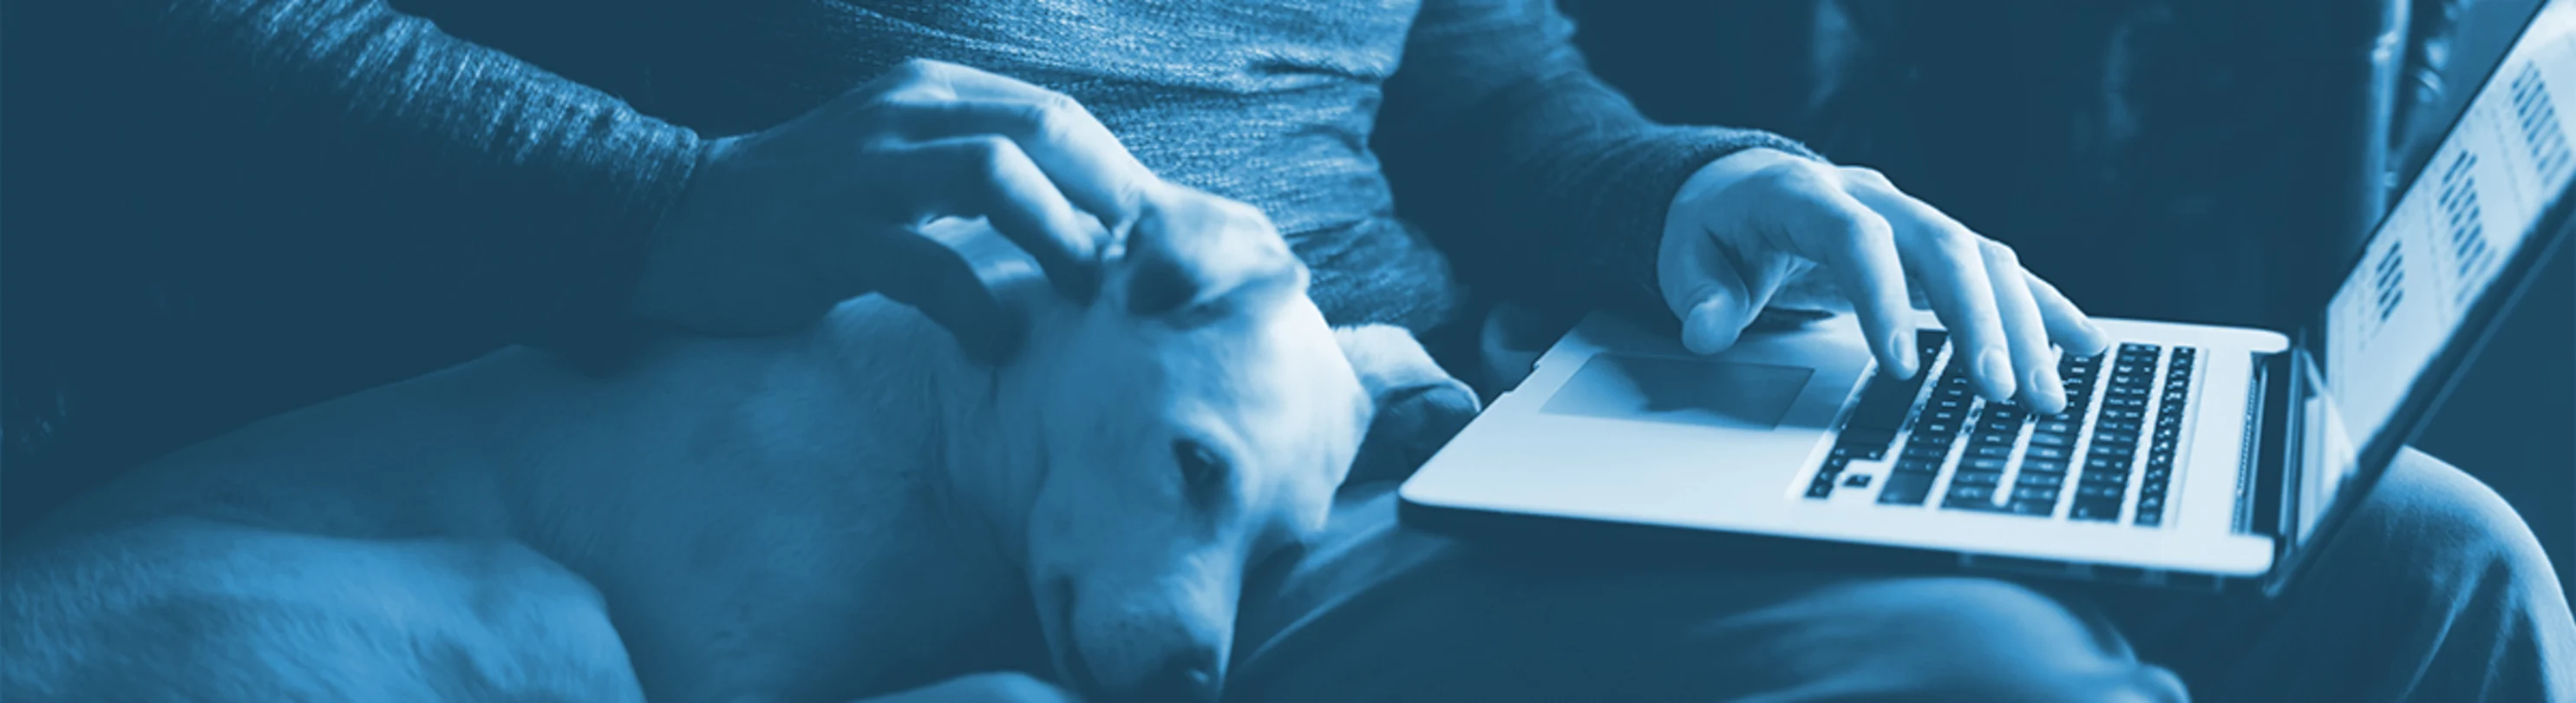 dog with person on couch with laptop